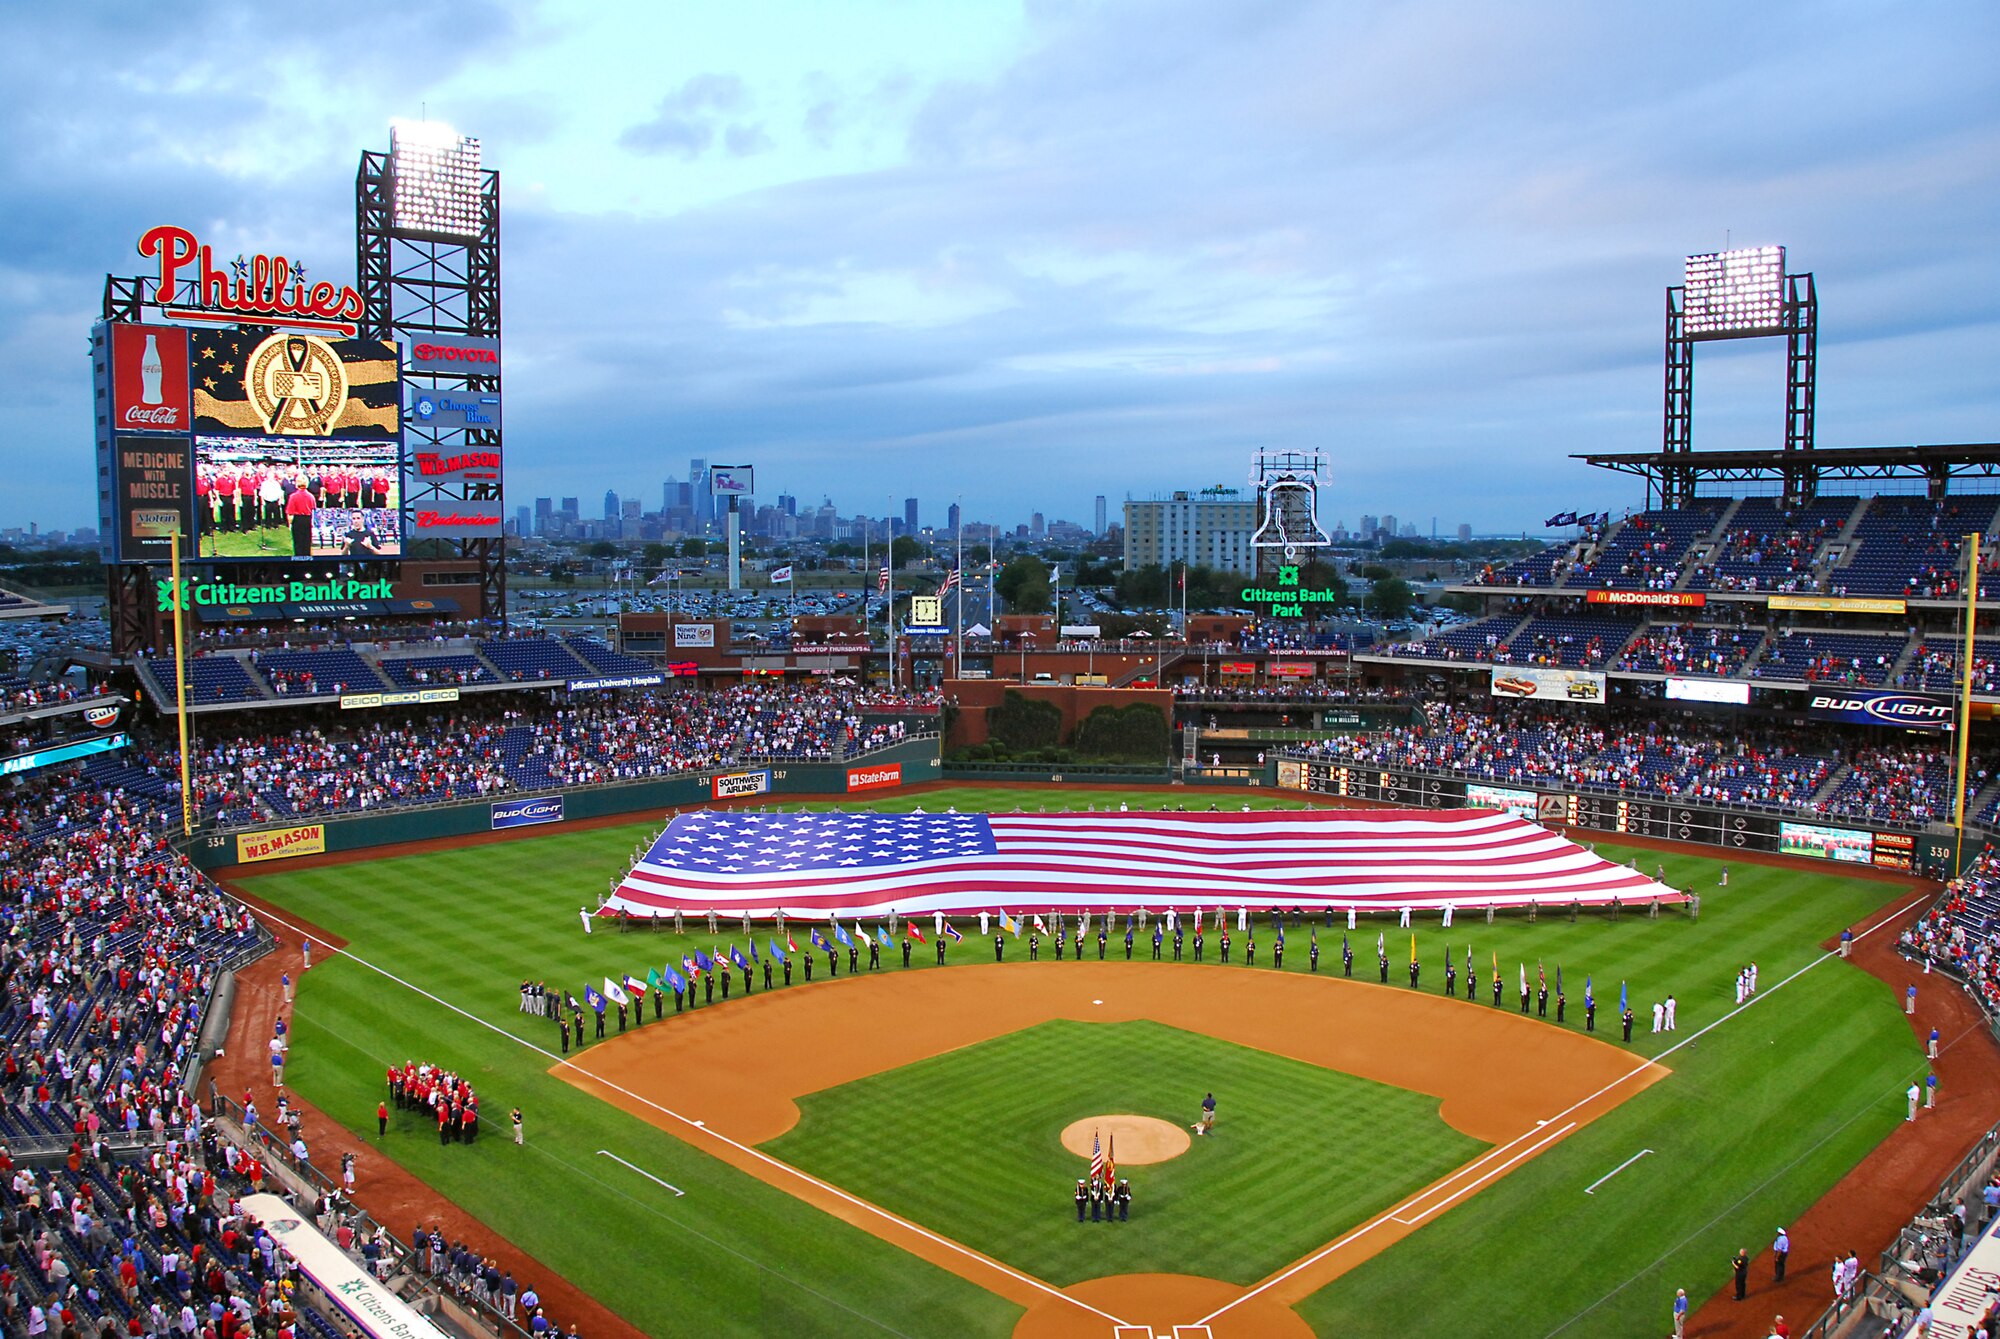 Servicemen and women from the 111th Fighter Wing, Pa. Army National Guard, as well as active duty Navy and Marine Corp members unfurled a 120-by-250 foot American Flag across the outfield of Citizens Bank Park during a Patriots Day ceremony Sept. 11 before the game. While the center field size flag was being opened, volunteer firefighters from Philadelphia, Delaware County and Warminster fire companies marched around the bases each carrying a state flag.